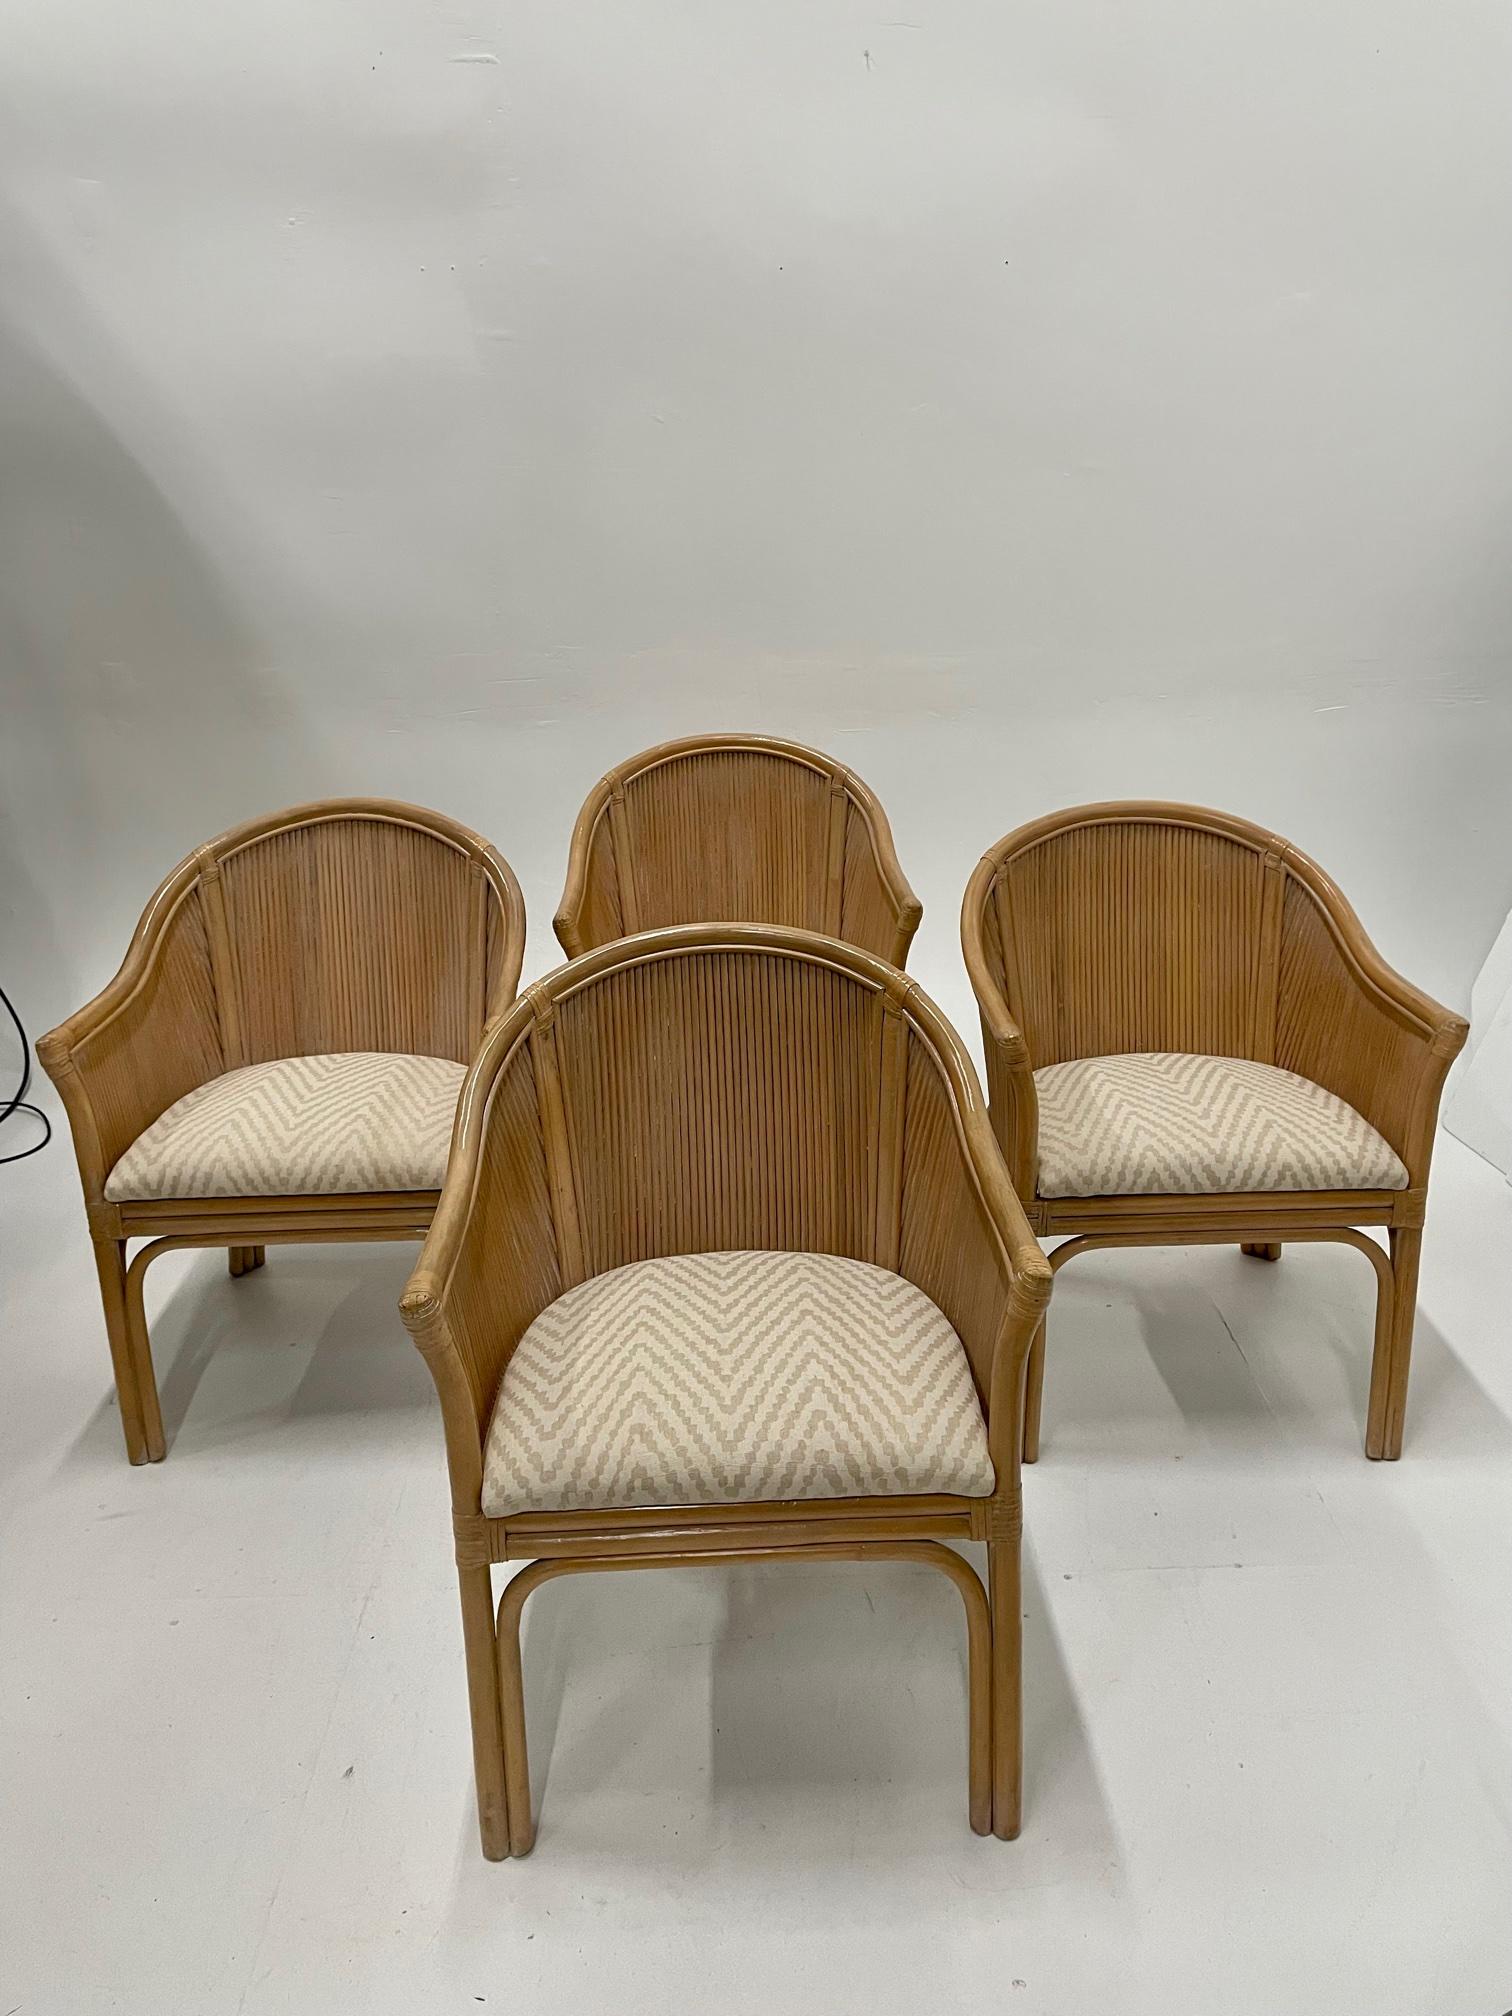 Chic set of 4 barrel back McGuire armchairs, perfect for dining or livingroom, having stunning mix of natural honey colored rattan parquetry & bamboo and cream and taupe zigzag upholstered seats.
Upholstery is new Old World Weavers fabric.